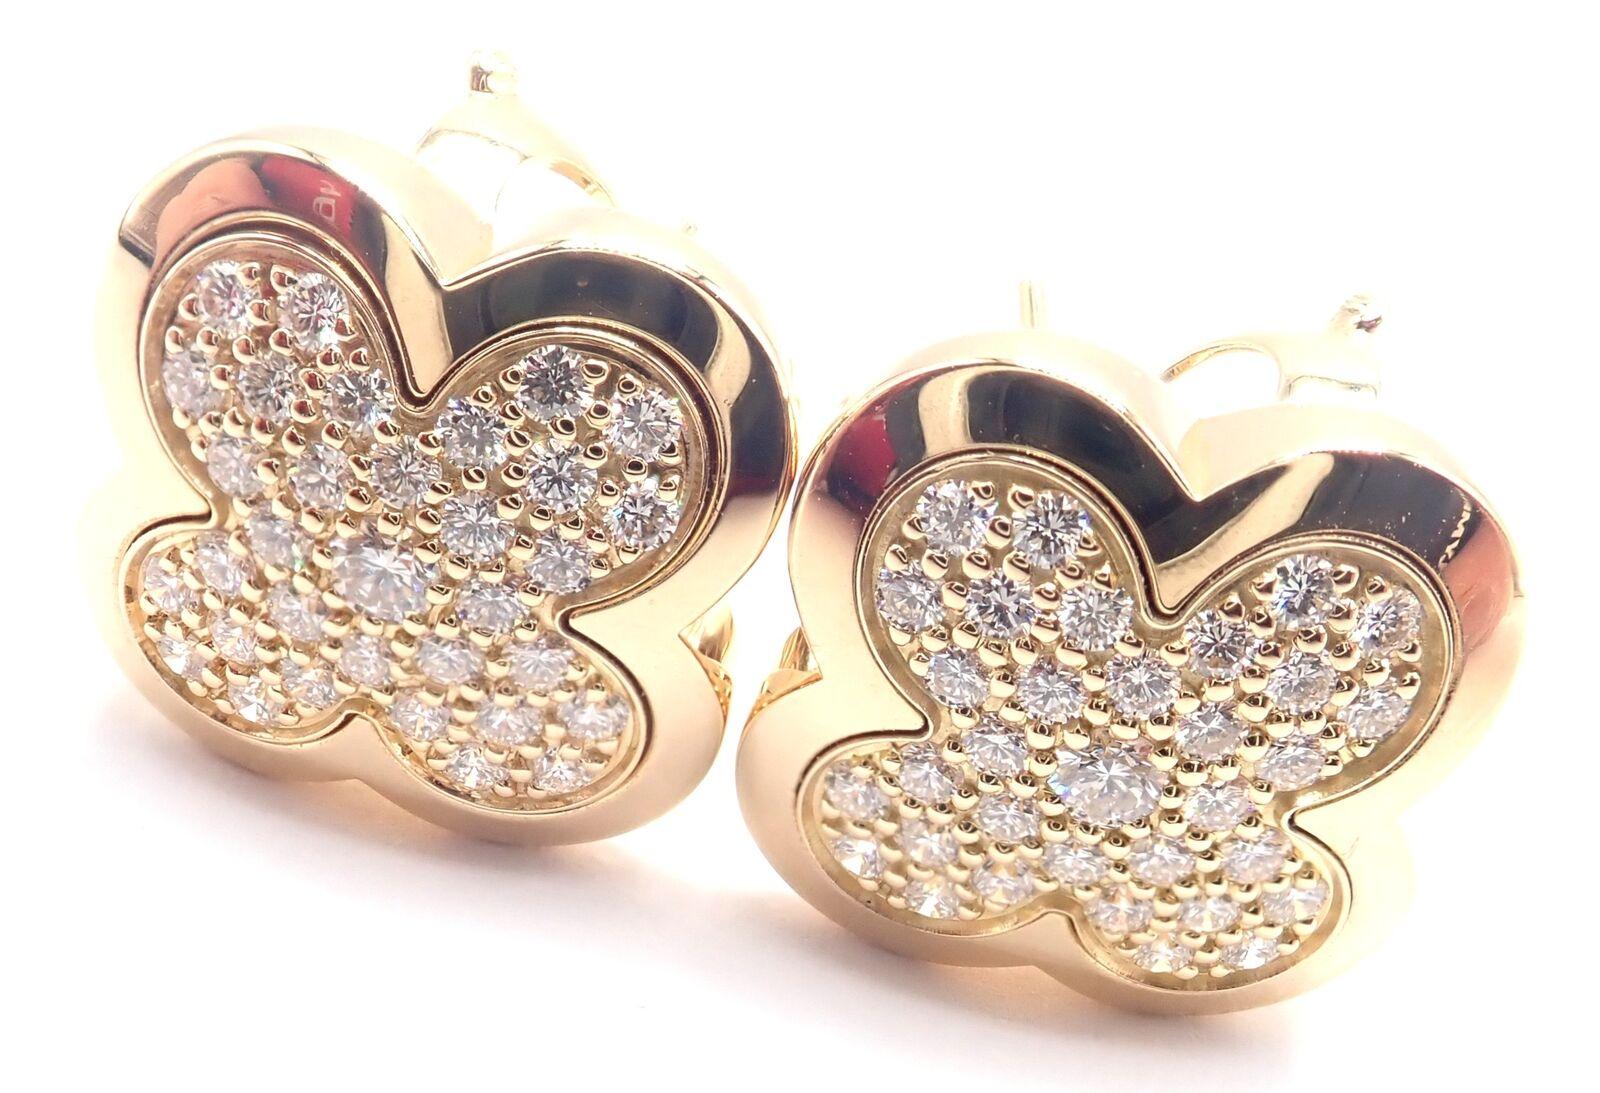 18k Yellow Gold Diamond Pure Alhambra Earrings by Van Cleef & Arpels.
With Round brilliant cut diamond VVS1 clarity, E color total weight 1.65ct
These earrings are for pierced ears.
Details:
Measurements: 16mm x 16mm
Weight: 12.6 grams
Stamped